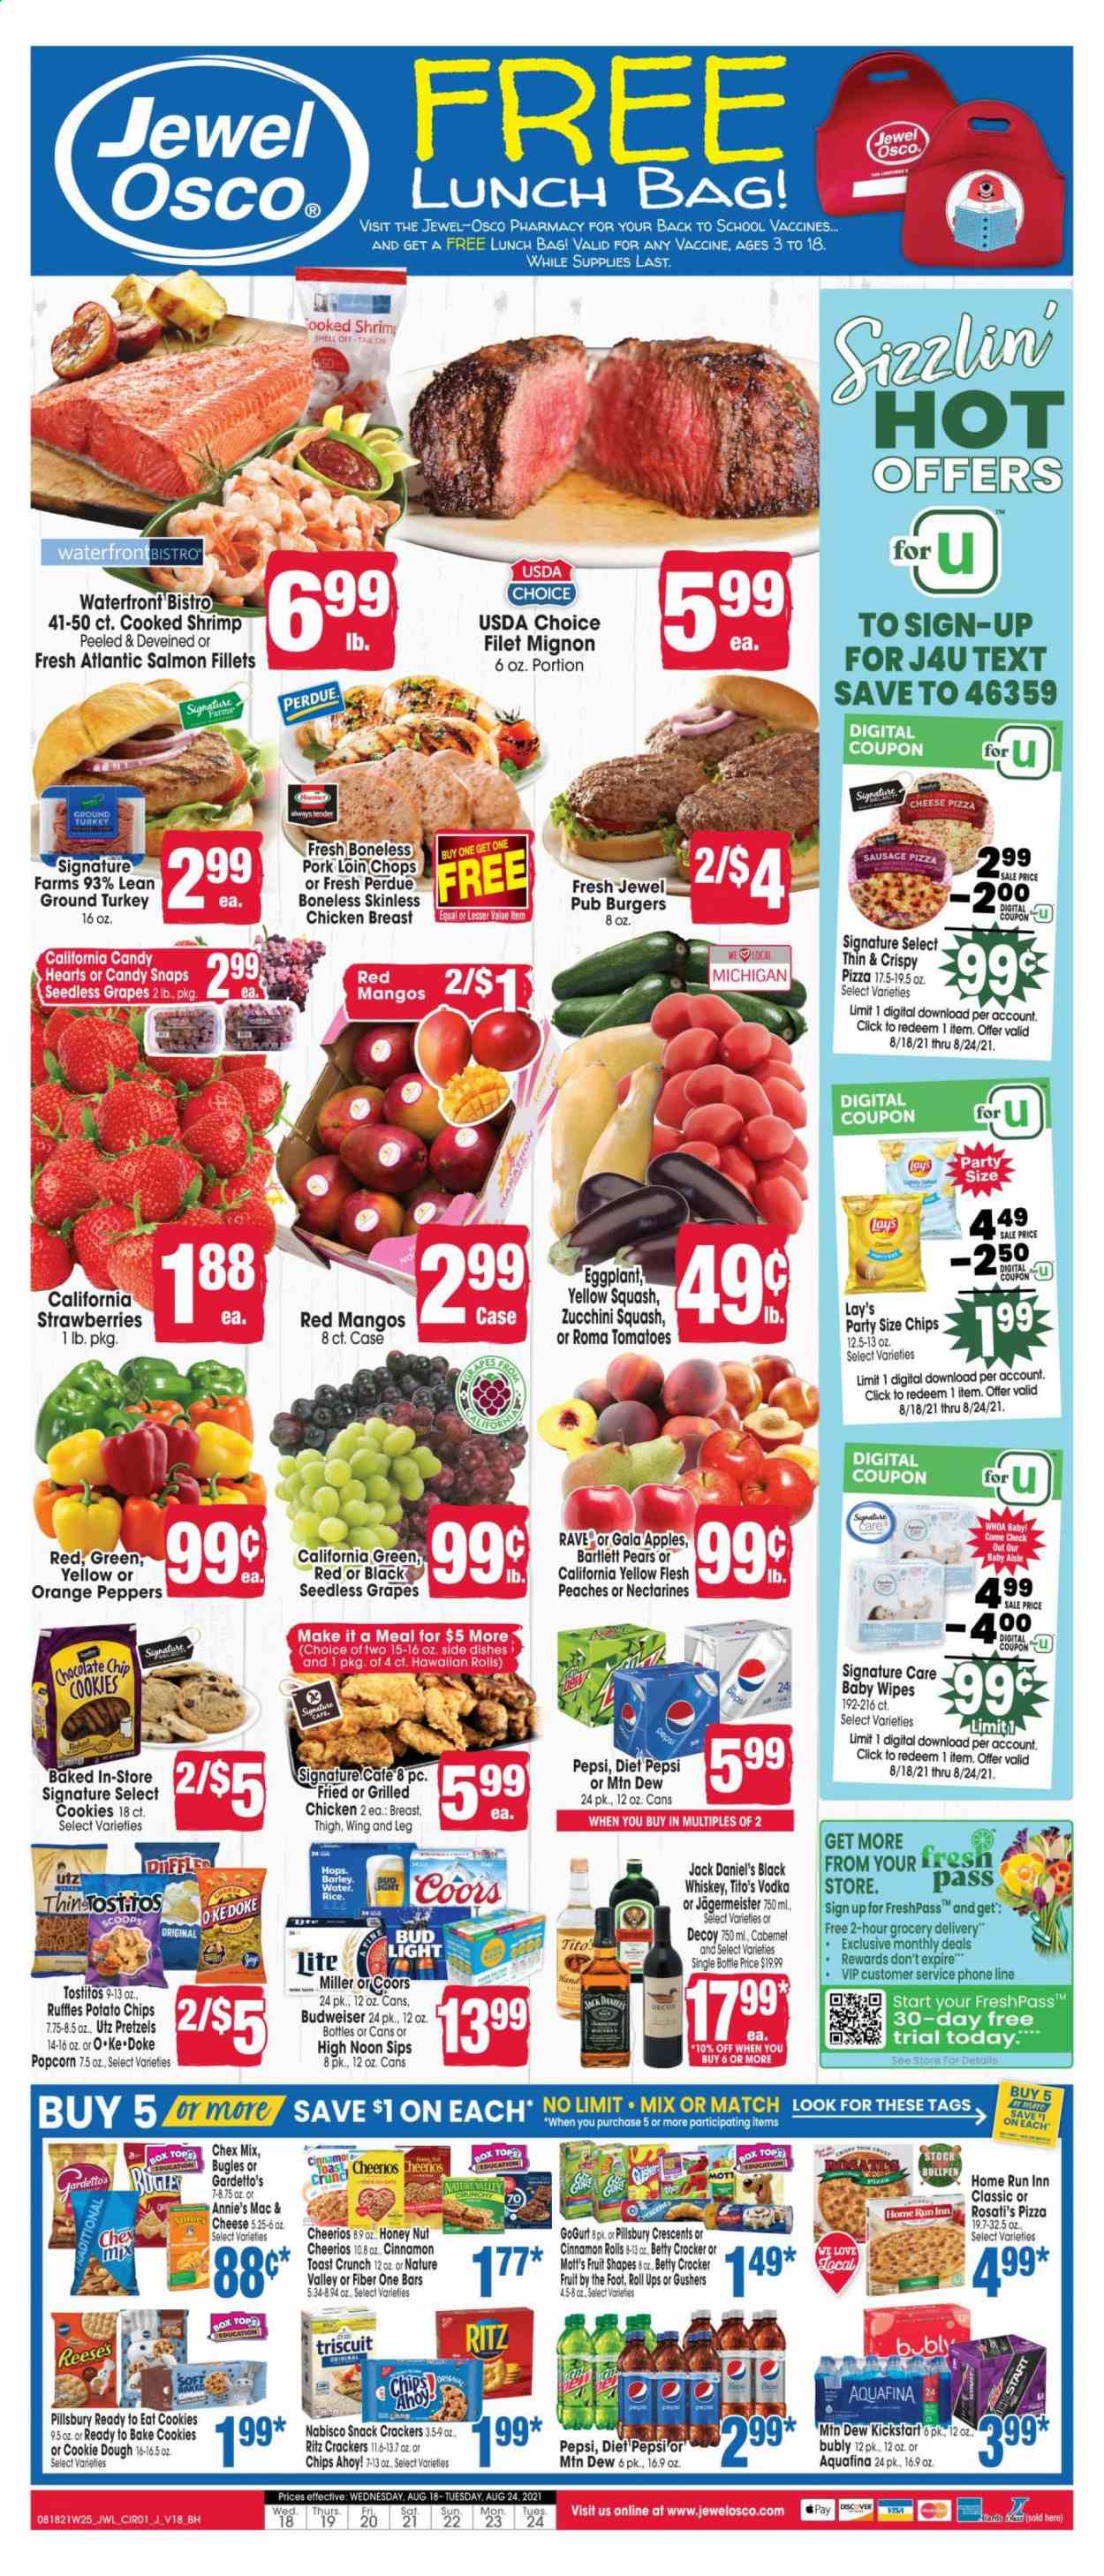 thumbnail - Jewel Osco Flyer - 08/18/2021 - 08/24/2021 - Sales products - Budweiser, Coors, Bartlett pears, seedless grapes, pretzels, cinnamon roll, hawaiian rolls, zucchini, peppers, eggplant, yellow squash, apples, Gala, grapes, mango, pears, oranges, Mott's, salmon, salmon fillet, shrimps, Jack Daniel's, hamburger, Pillsbury, Perdue®, Annie's, sausage, Reese's, cookie dough, cookies, snack, crackers, Chips Ahoy!, RITZ, potato chips, chips, Lay’s, popcorn, Ruffles, Tostitos, Chex Mix, Cheerios, Nature Valley, Fiber One, Mountain Dew, Pepsi, Diet Pepsi, Aquafina, Cabernet Sauvignon, vodka, whiskey, Jägermeister, whisky, beer, Bud Light, Miller, ground turkey, chicken breasts, beef tenderloin, pork chops, pork loin, pork meat, wipes, baby wipes, nectarines, peaches. Page 1.